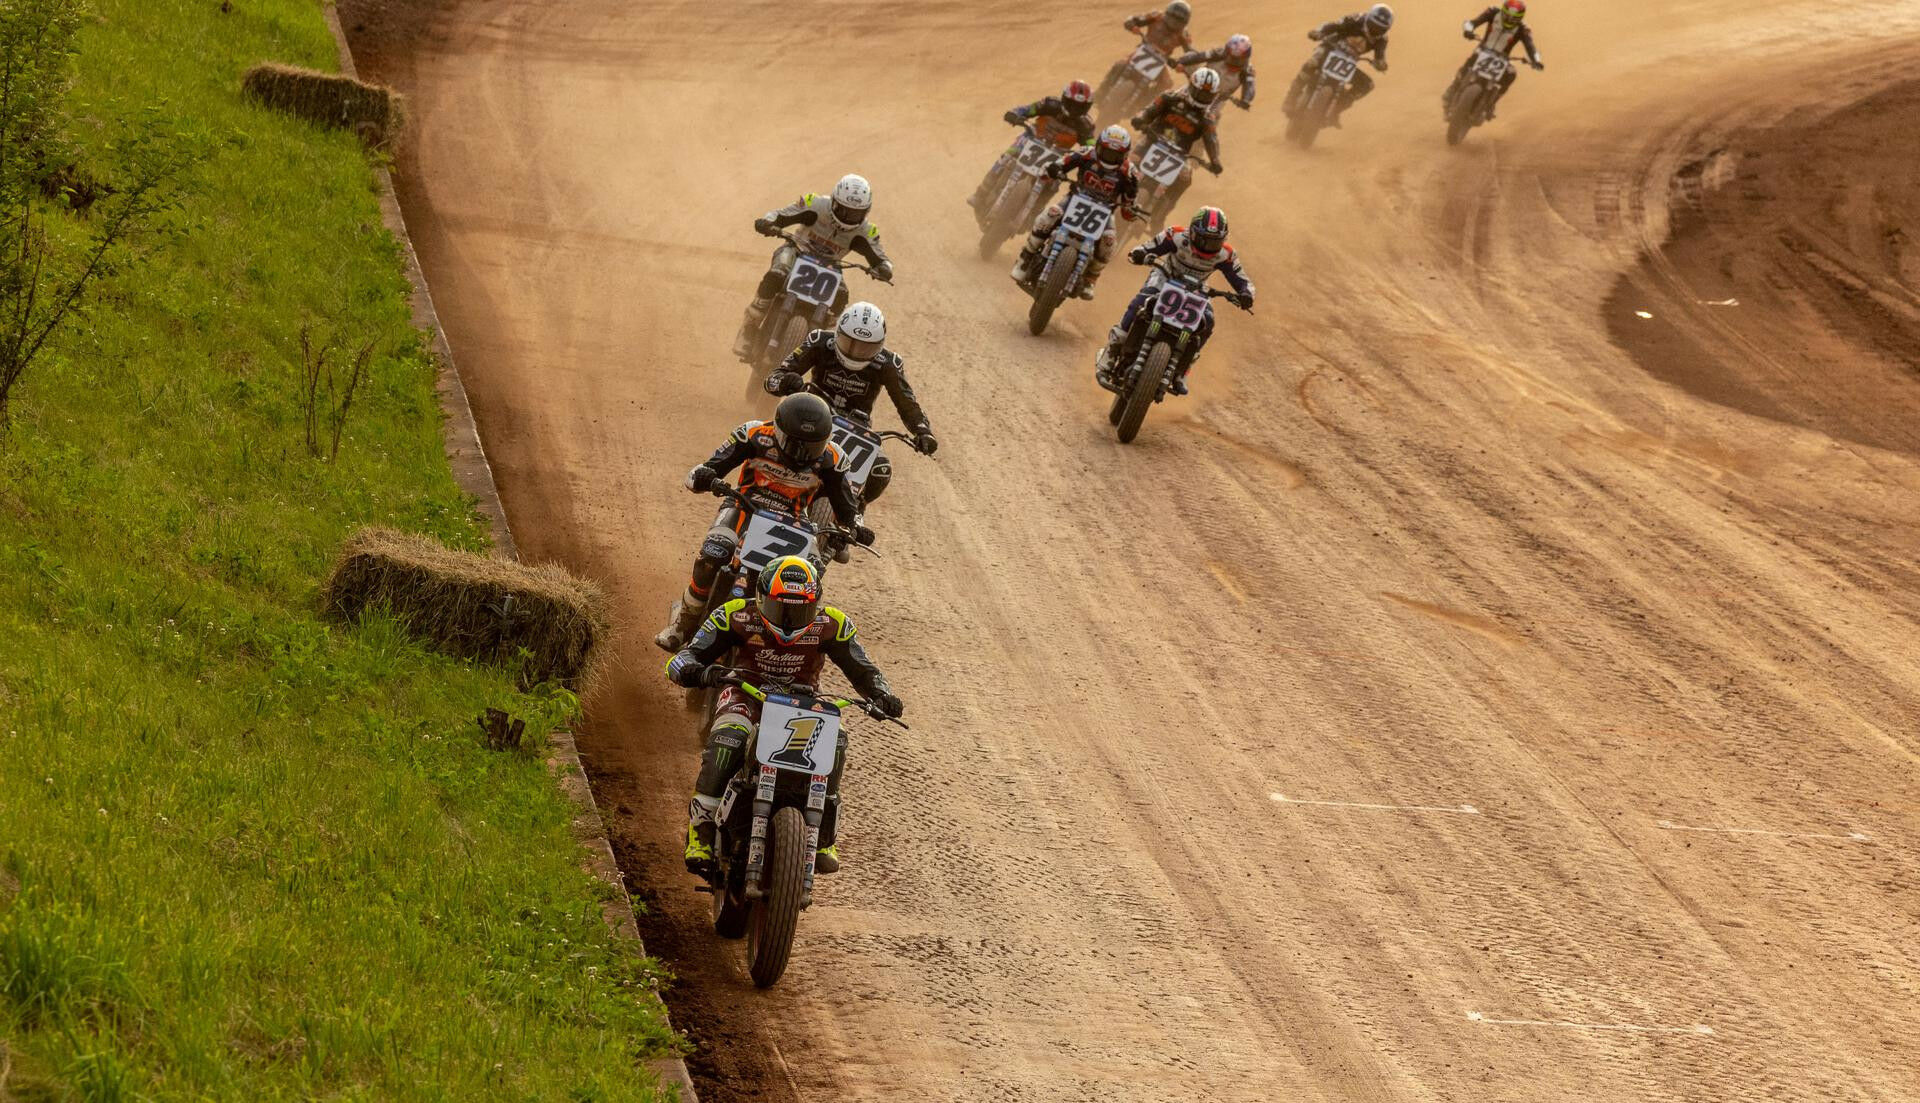 Jared Mees (1) leads the field at the West Virginia Half-Mile. Photo courtesy AFT.